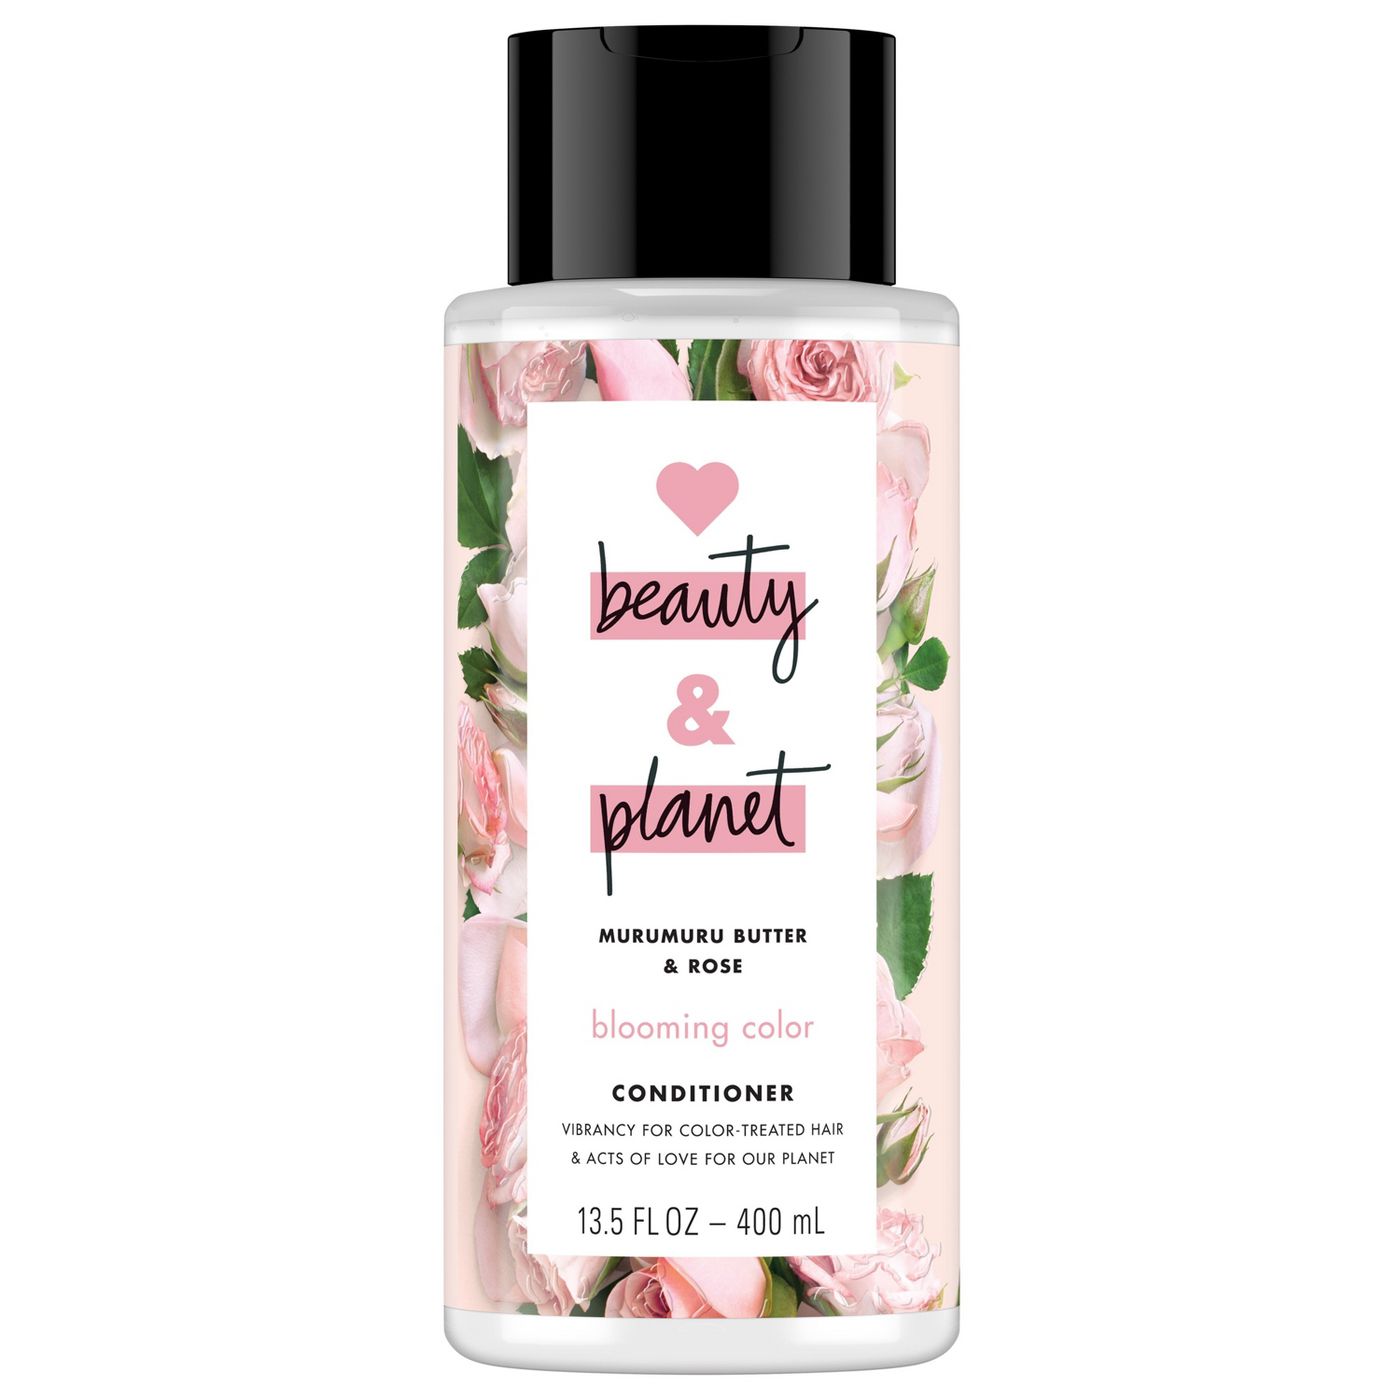 Love Beauty & Planet Murumuru Butter & Rose Blooming Color Conditioner - 13.5 fl oz - image 1 of 7